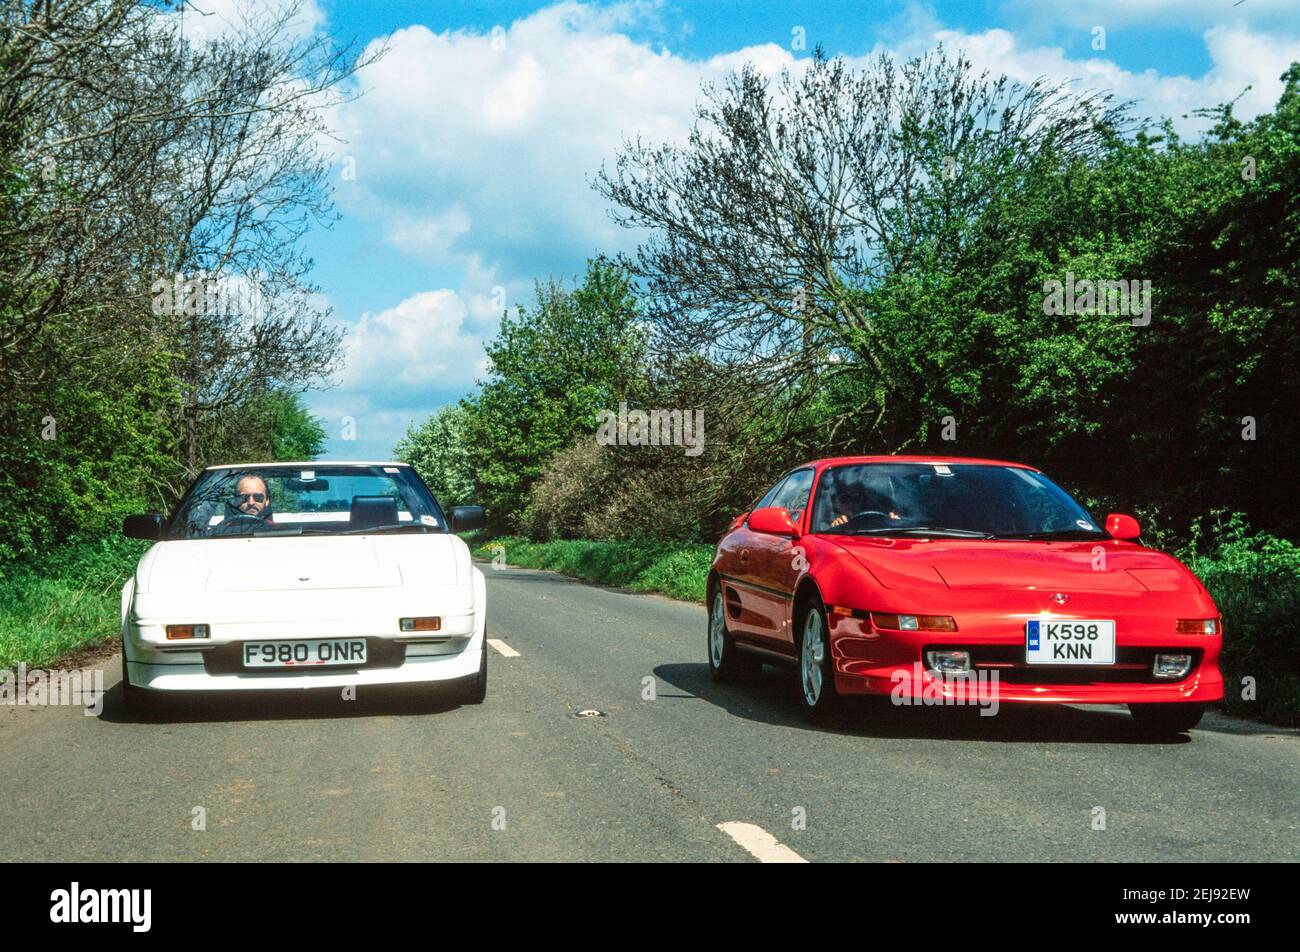 1998 England two Toyota mr2 cars - A red Japanese import Toyota MR2 mk2 turbo and a white Toyota MR2 mk1 car with the white MR2 mk1 mr2 overtaking the red Toyota MR2 mk2 turbo on a country lane England GB UK Europe Stock Photo